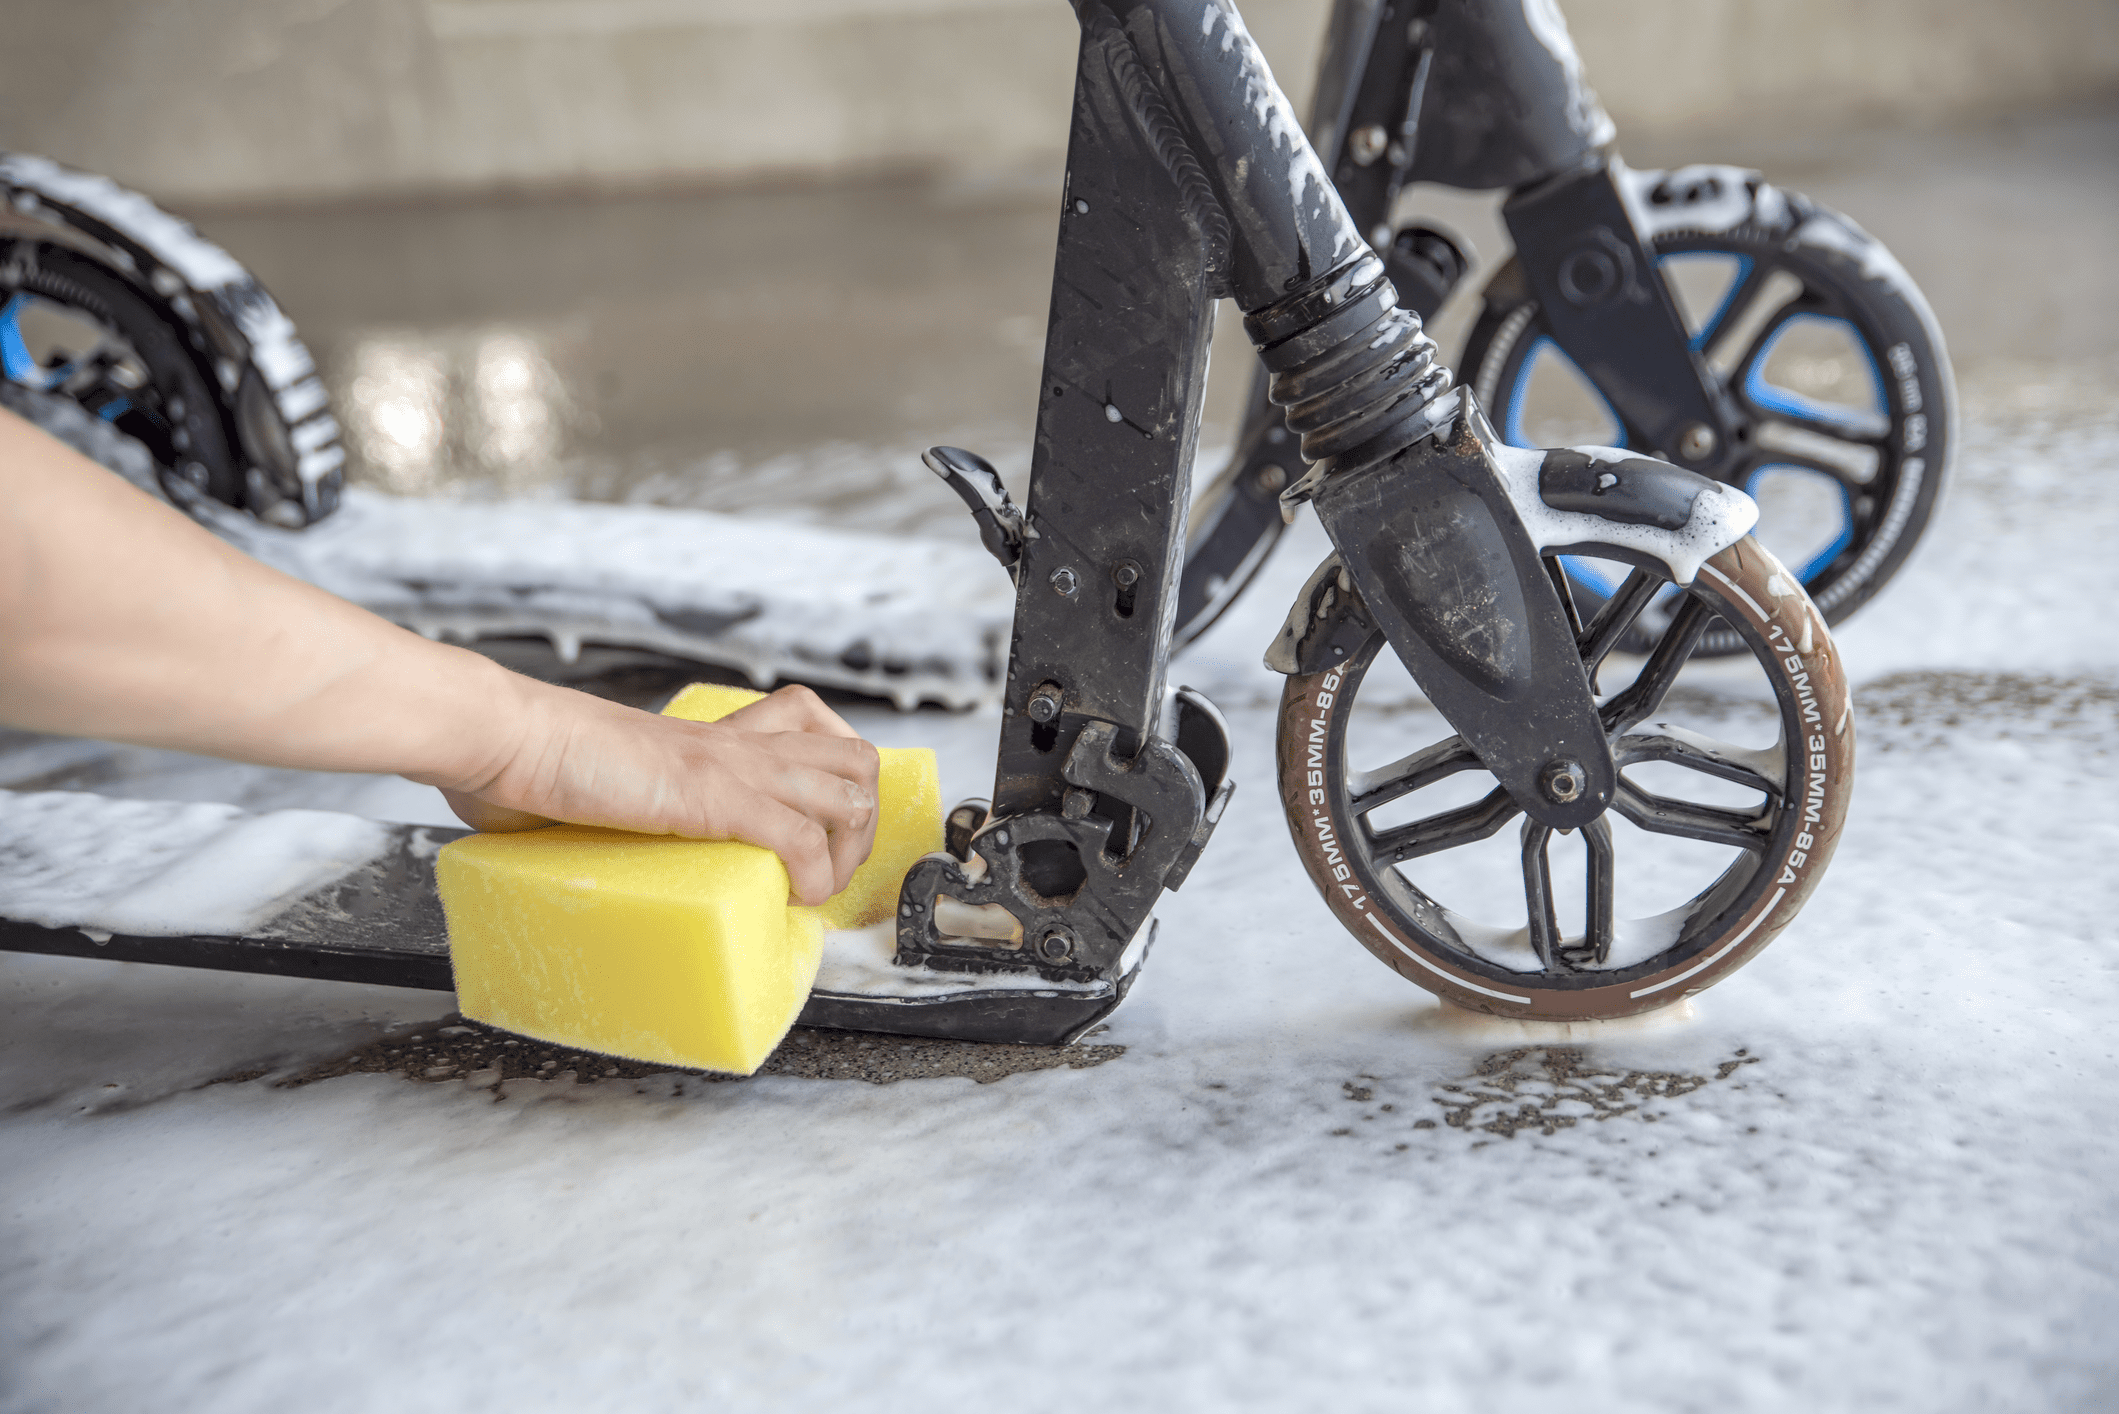 cleaning electric scooter with a sponge